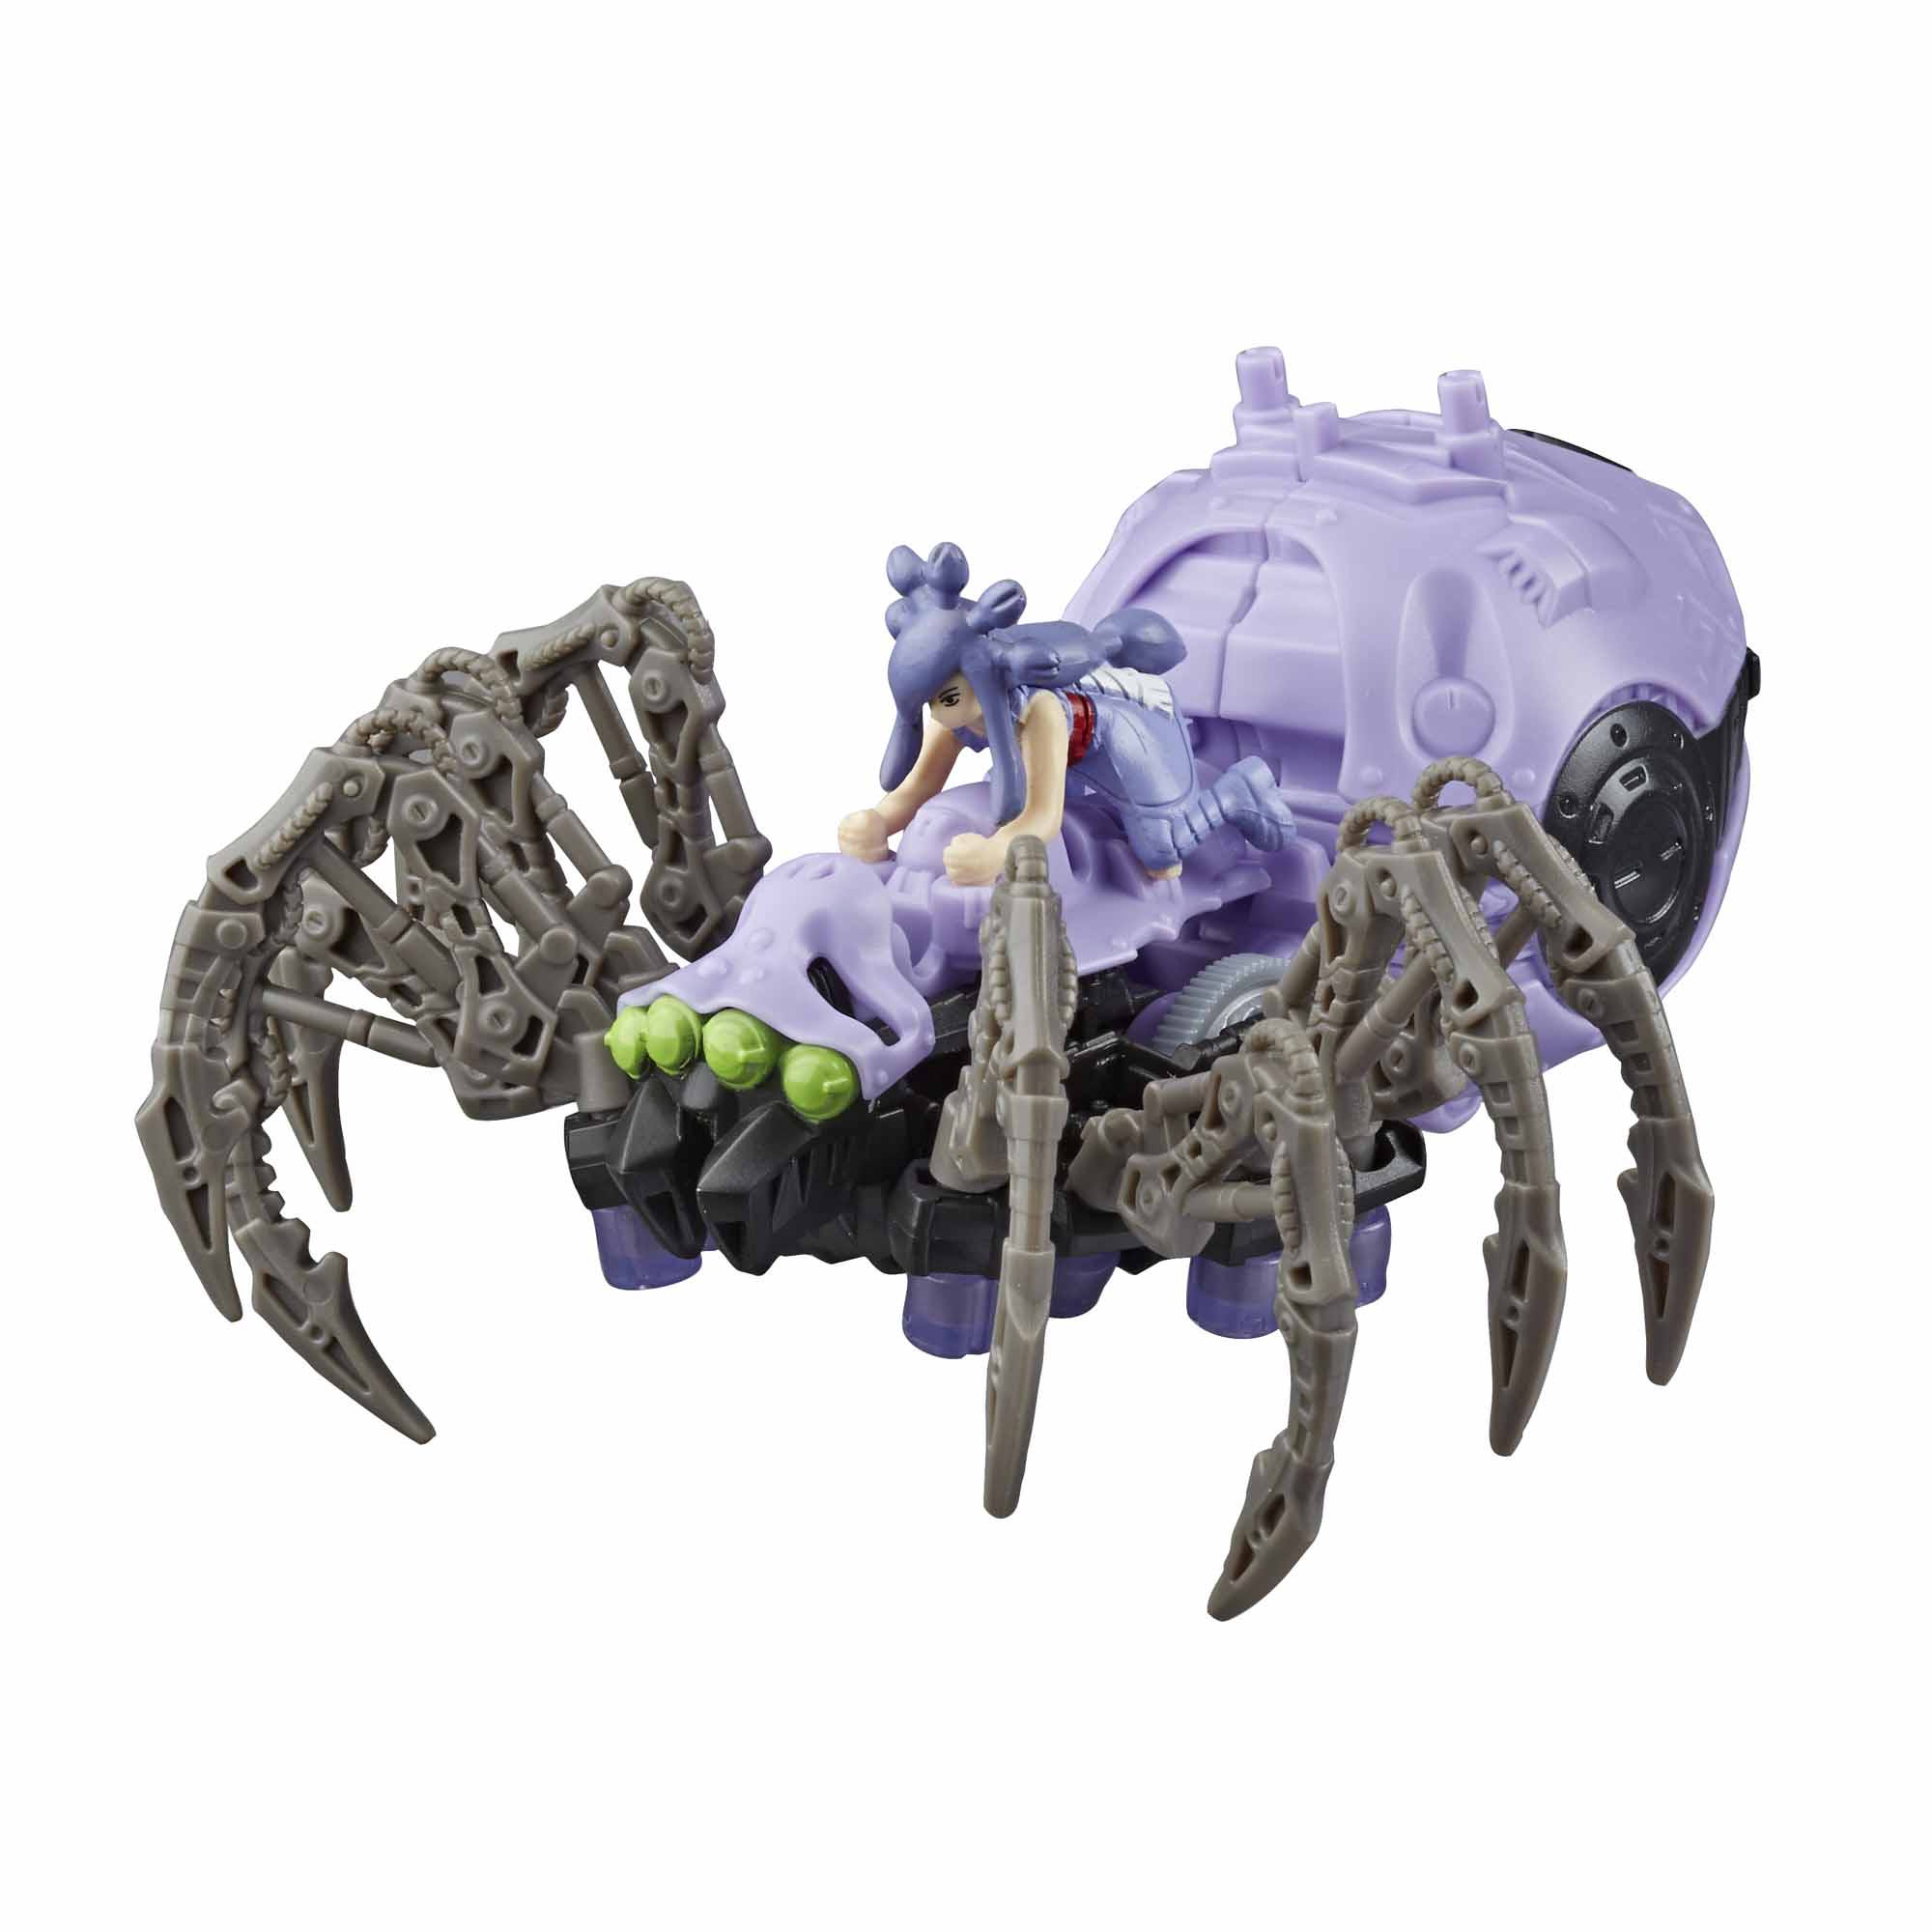 Zoids Mega Battlers Phobia - Spider-Type Buildable Beast Figure, Wind-Up Motion - Kids Toys Ages 8 and Up, 35 Pieces